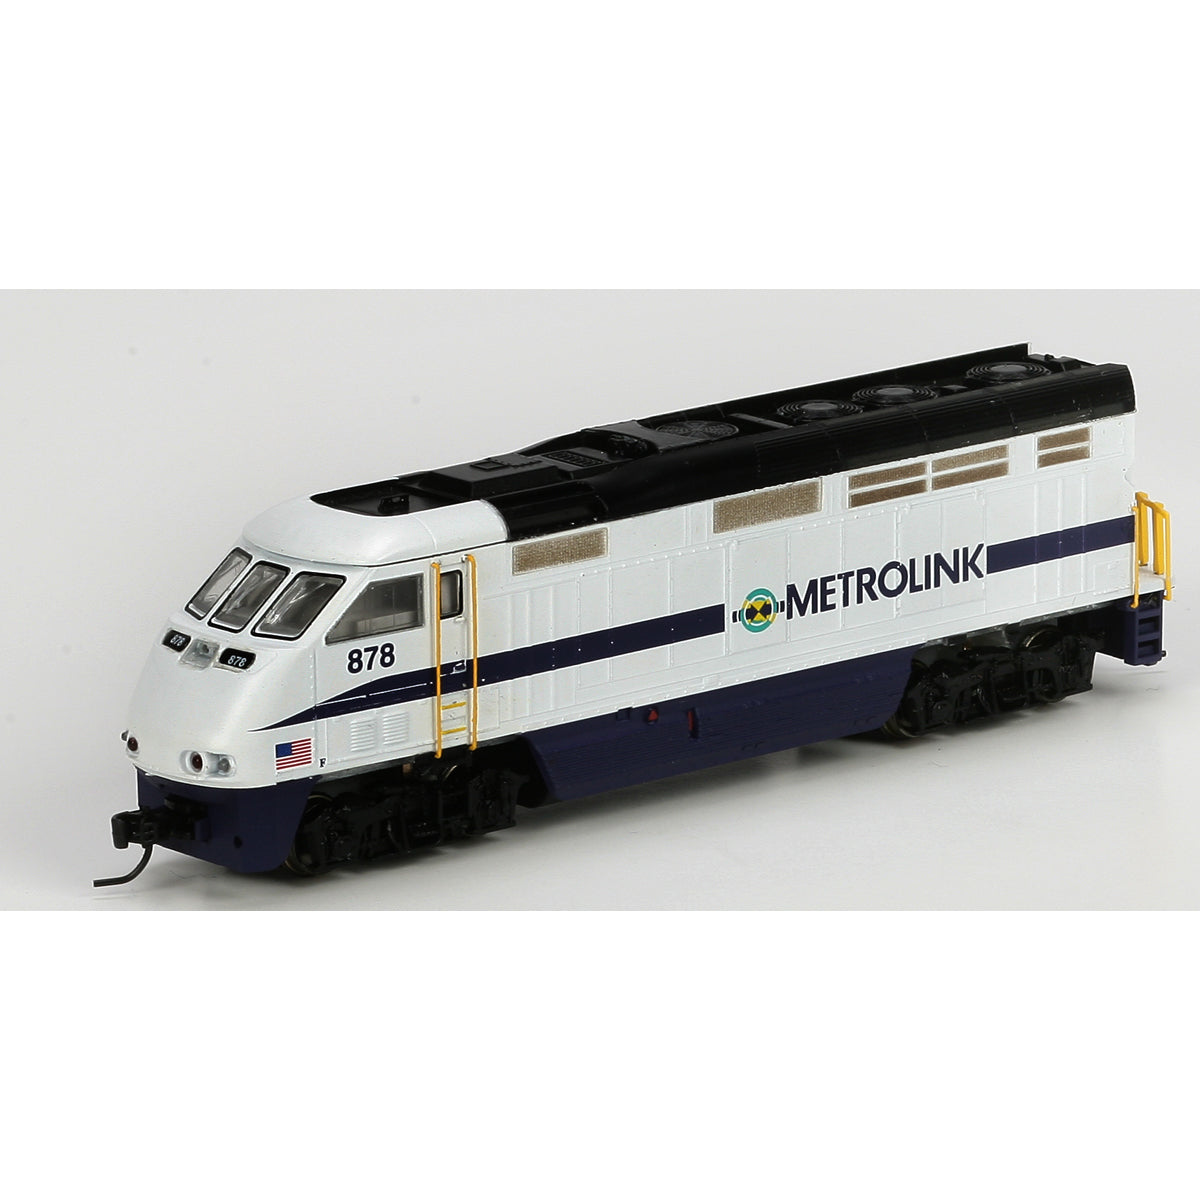 ATHEARN DCC AND SOUND N SCALE ENGINE 23770